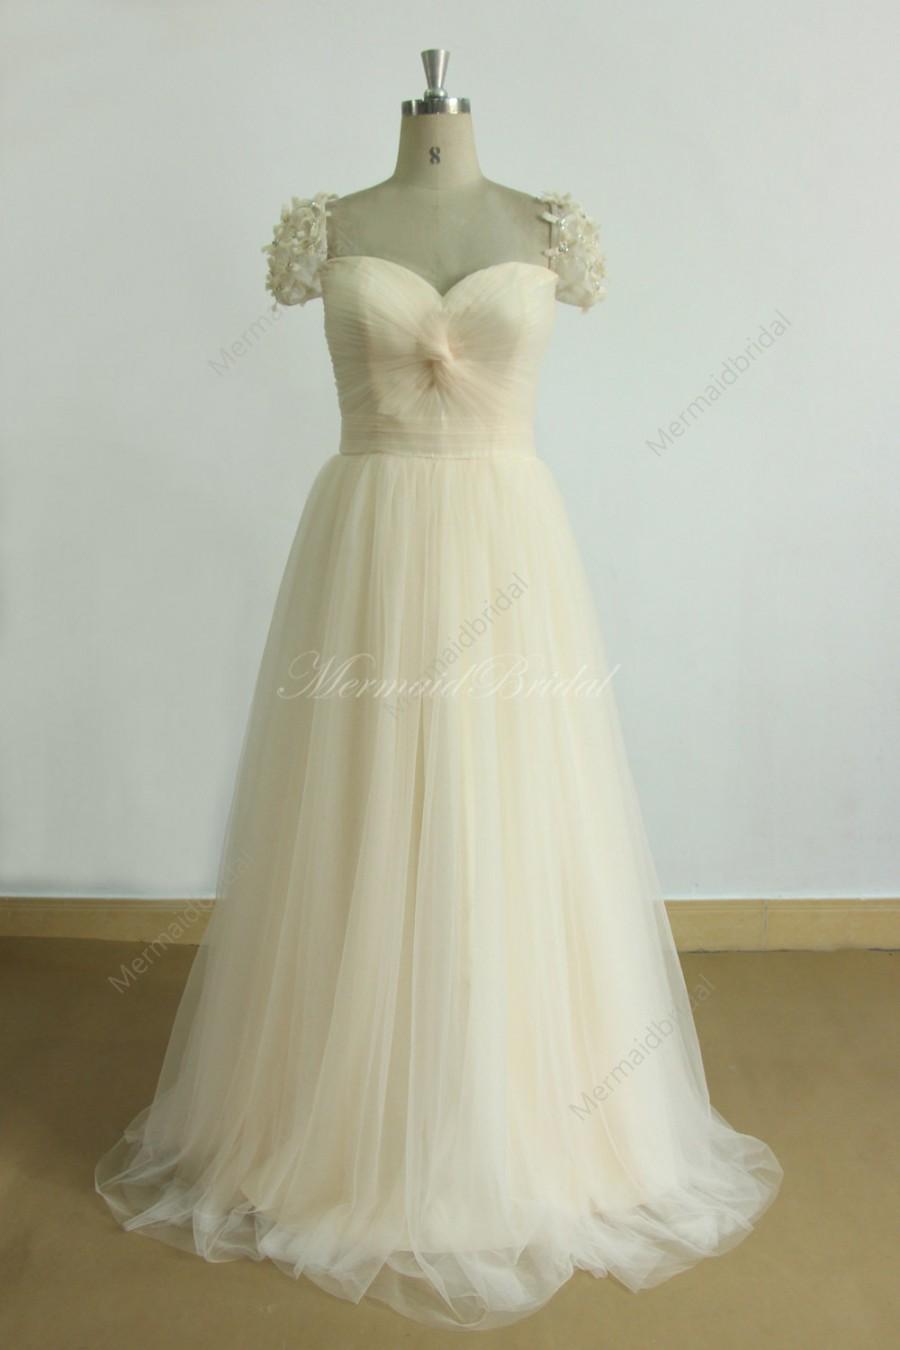 Mariage - Cream/light champagne a line tulle wedding dress with cap sleeves